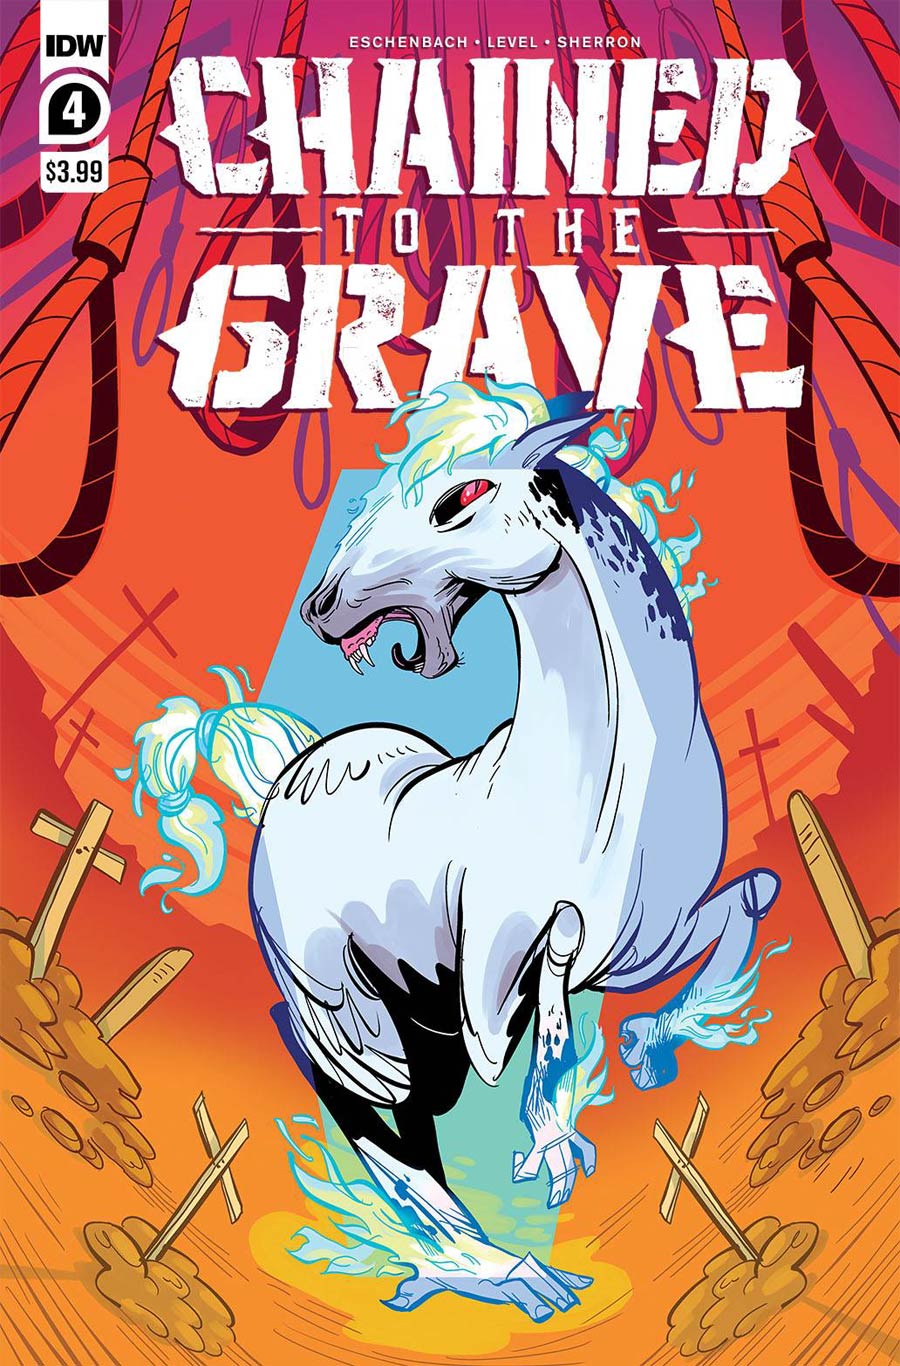 Chained To The Grave #4 Cover A Regular Kate Sherron Cover